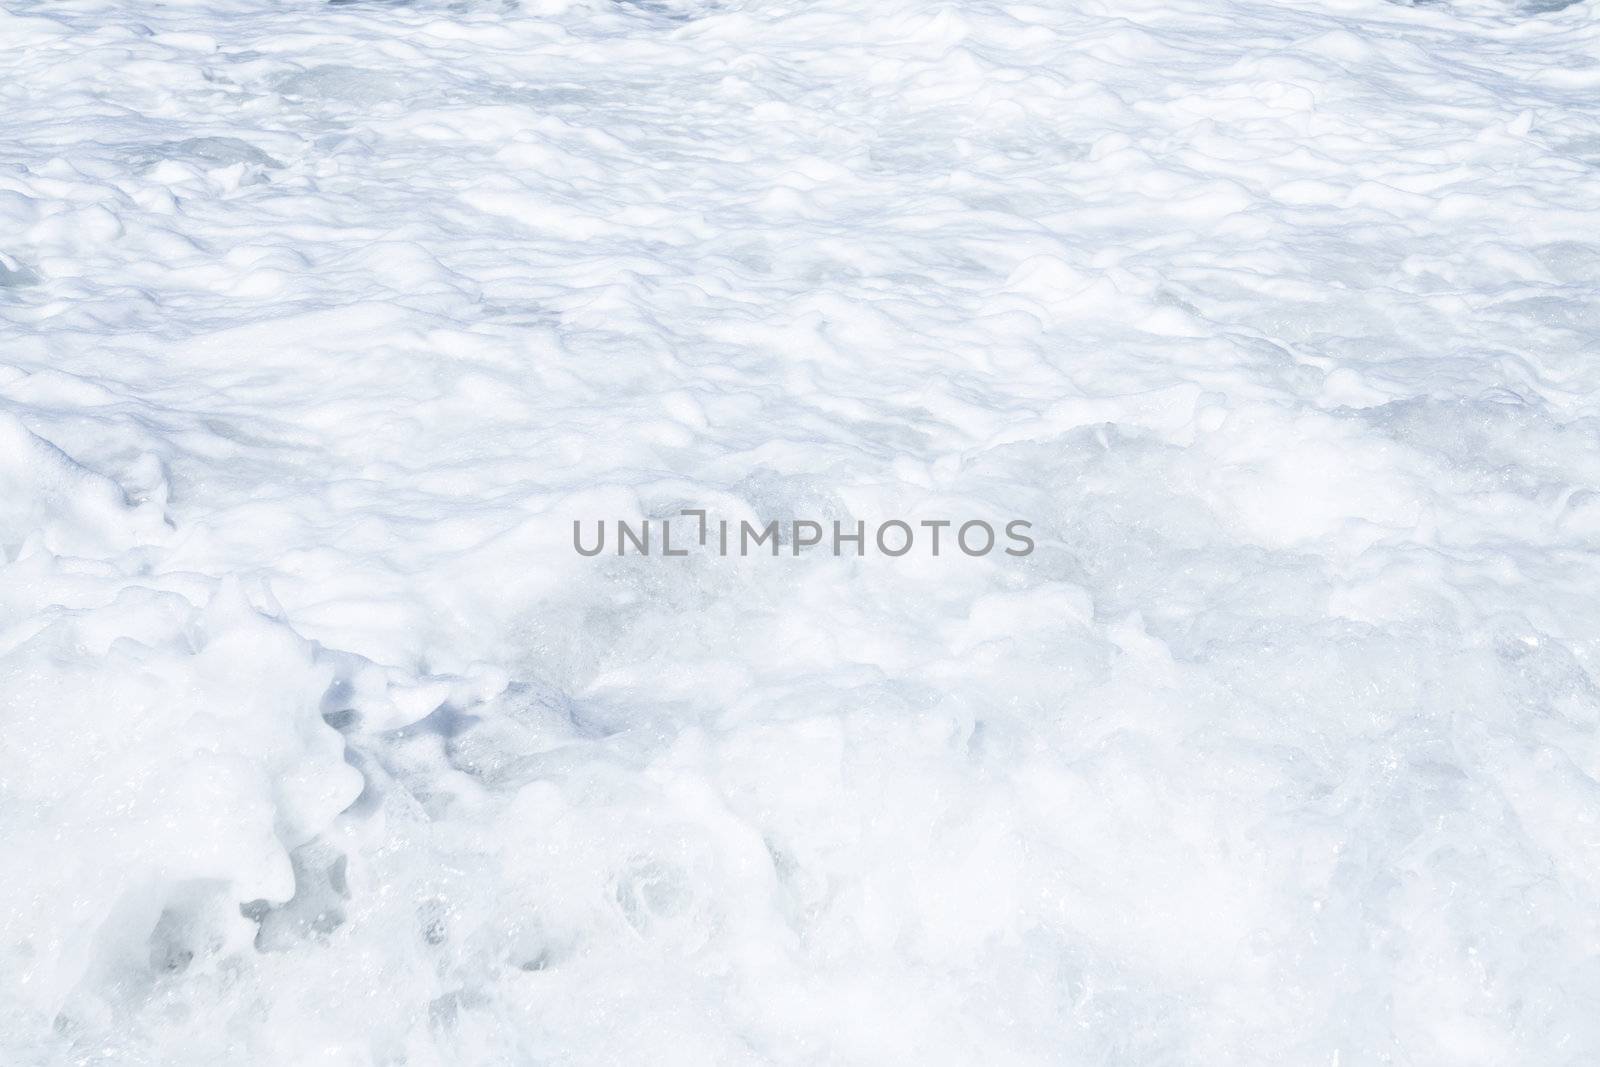 Foamy waves of ocean as a natural background